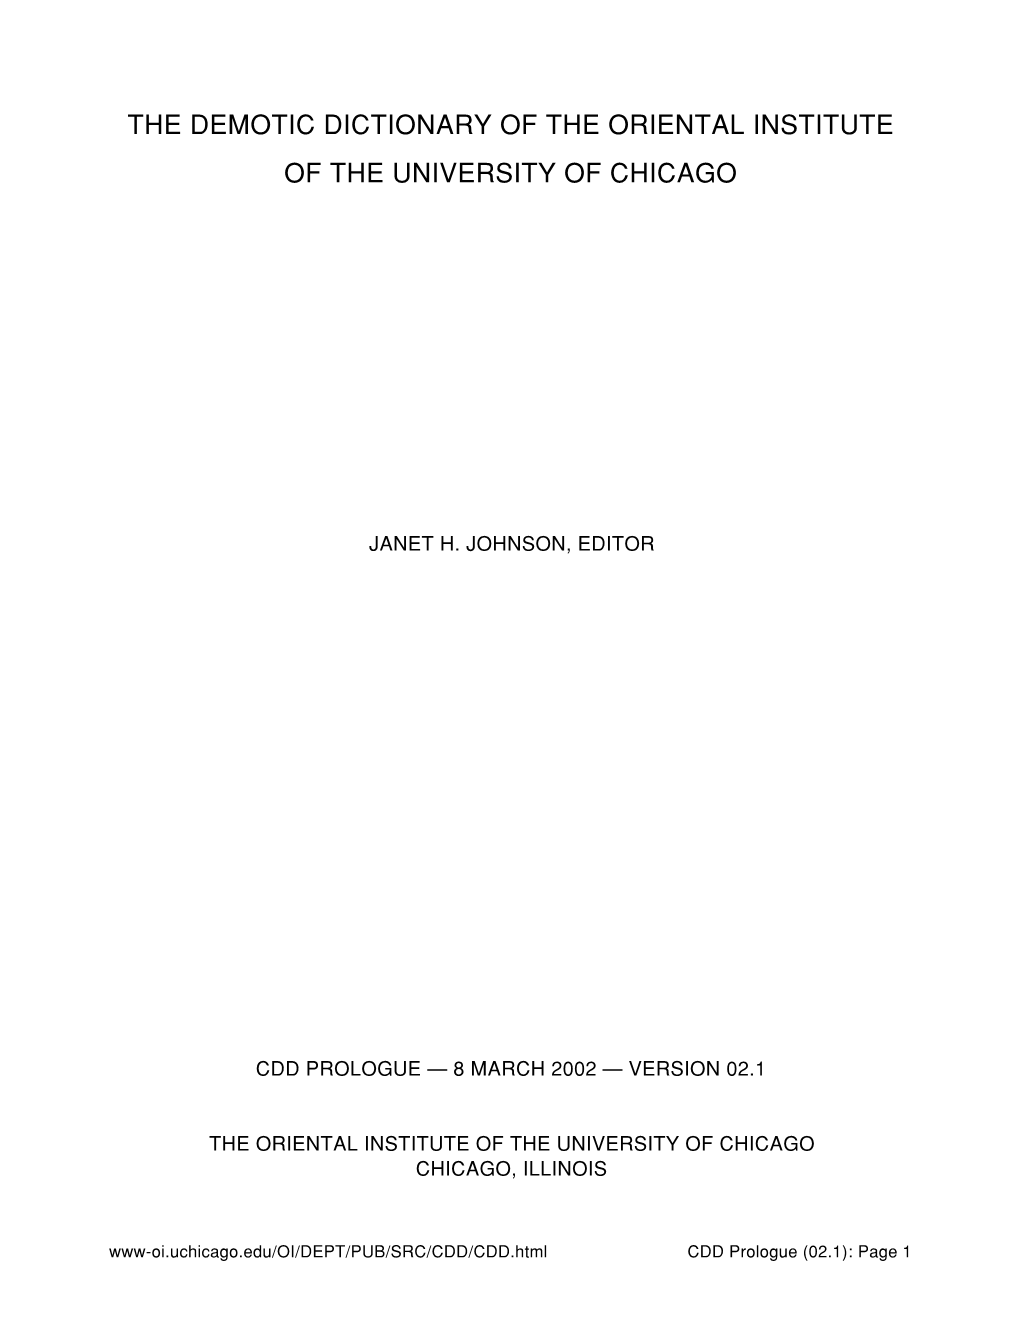 The Demotic Dictionary of the Oriental Institute of the University of Chicago